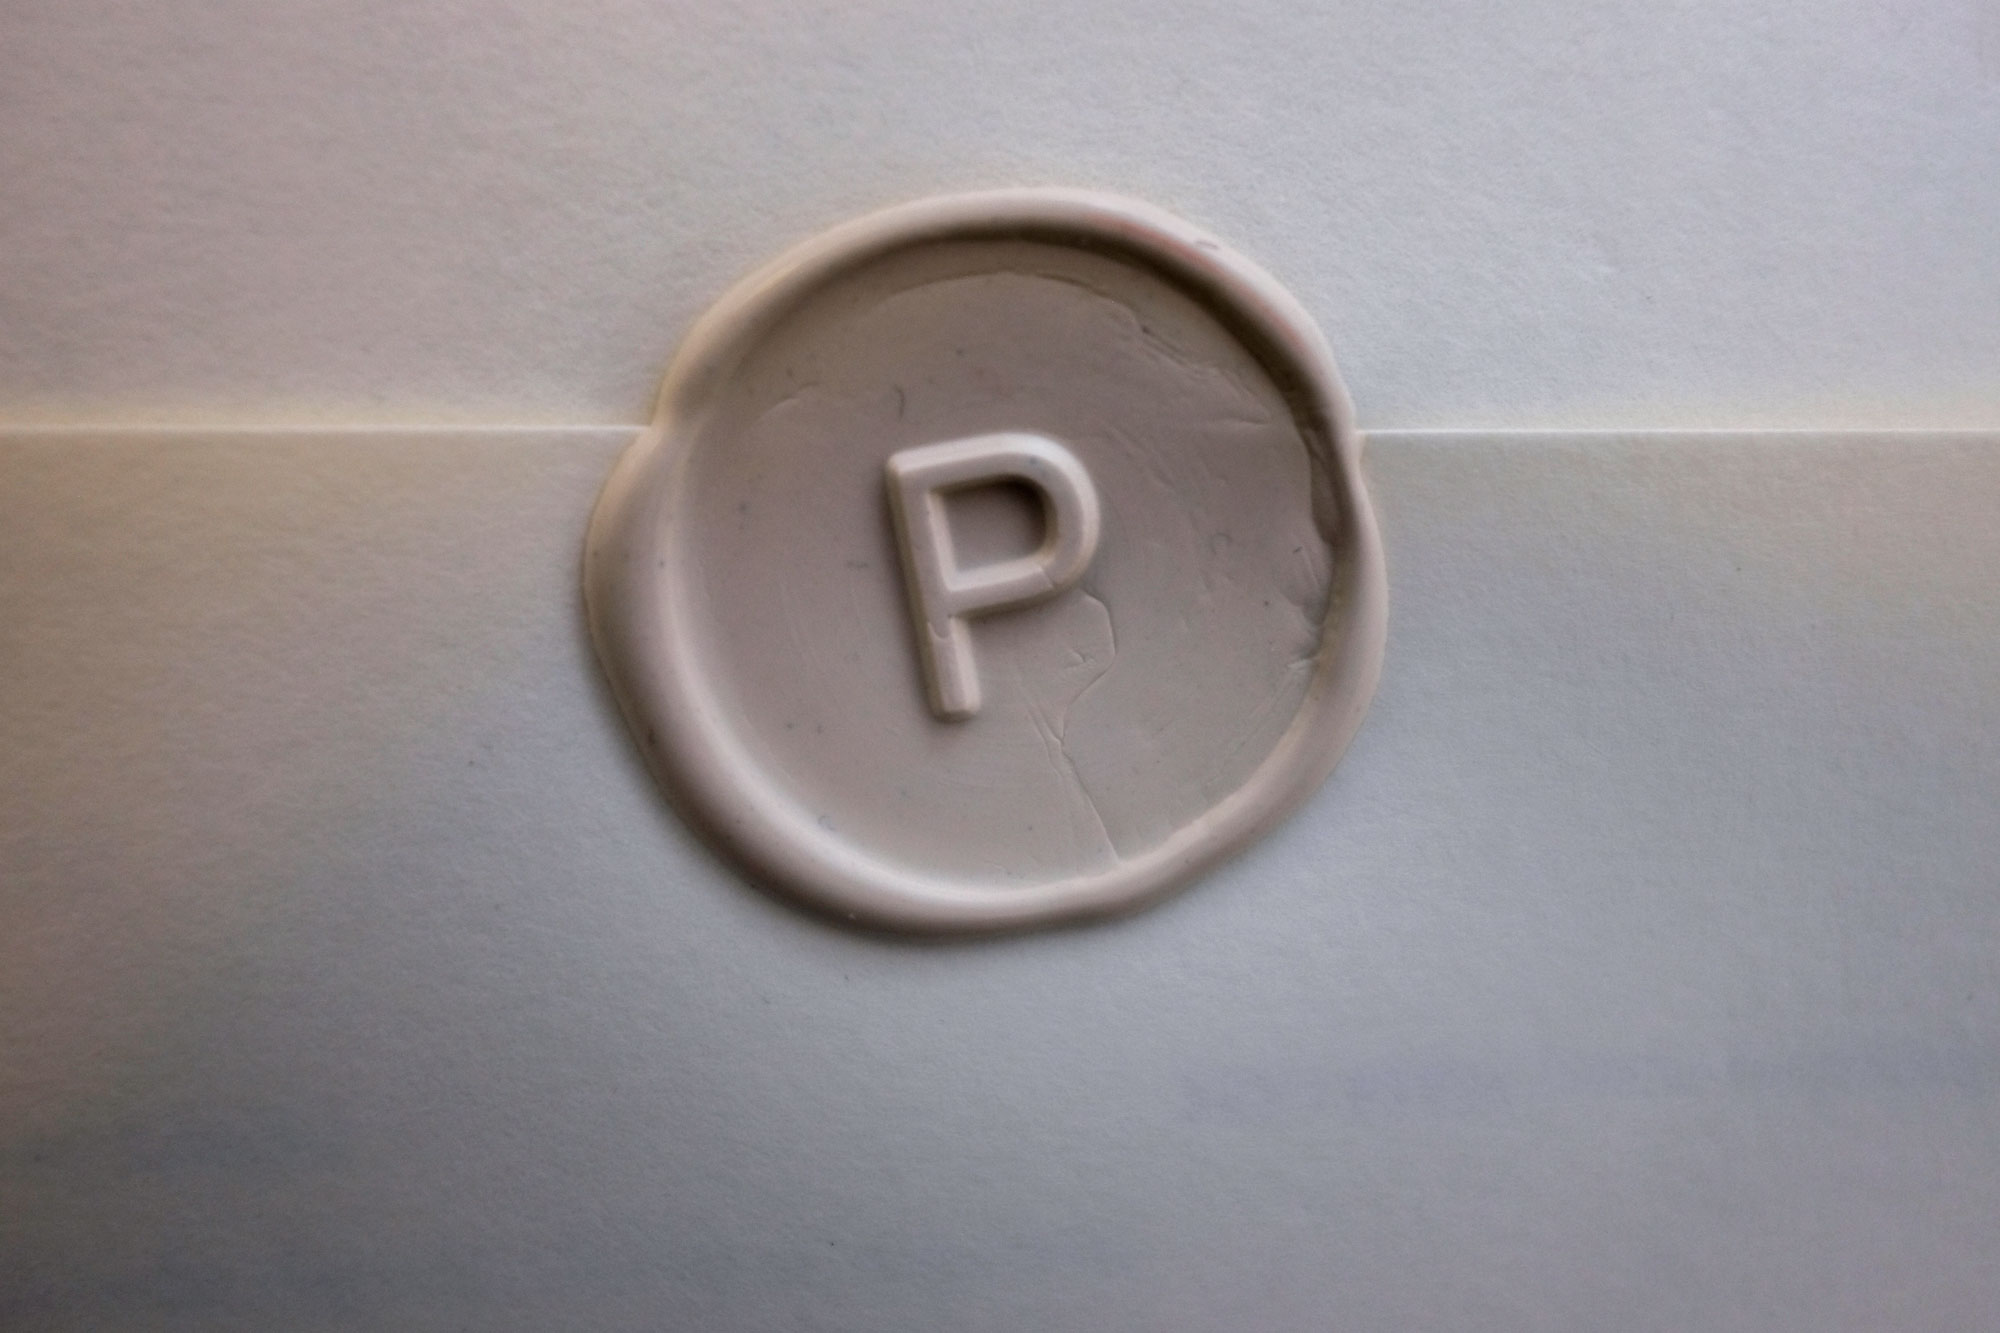 Envelope with a wax seal and the letter P stamped in